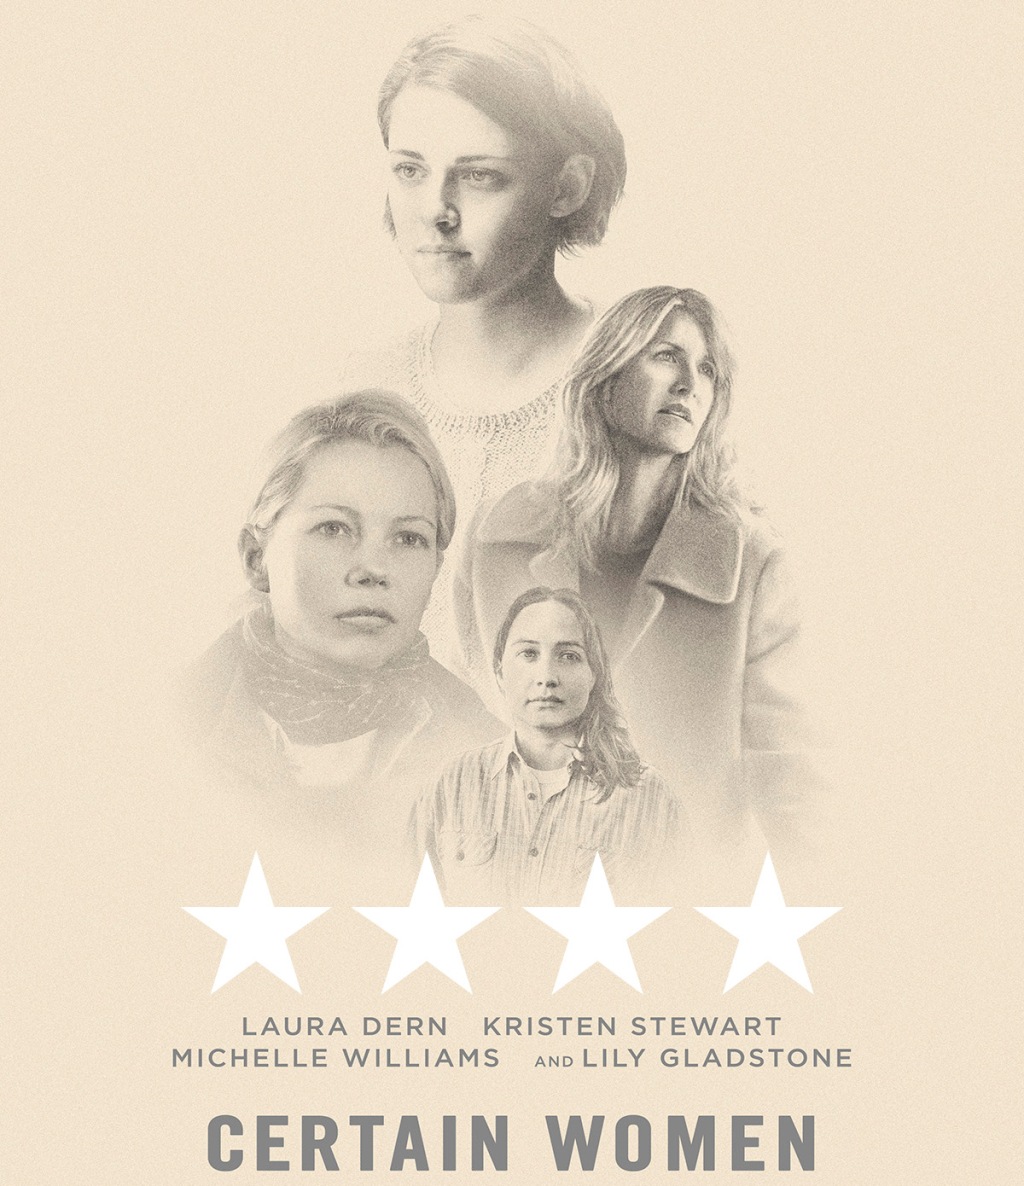 Certain Women: A film with resolve